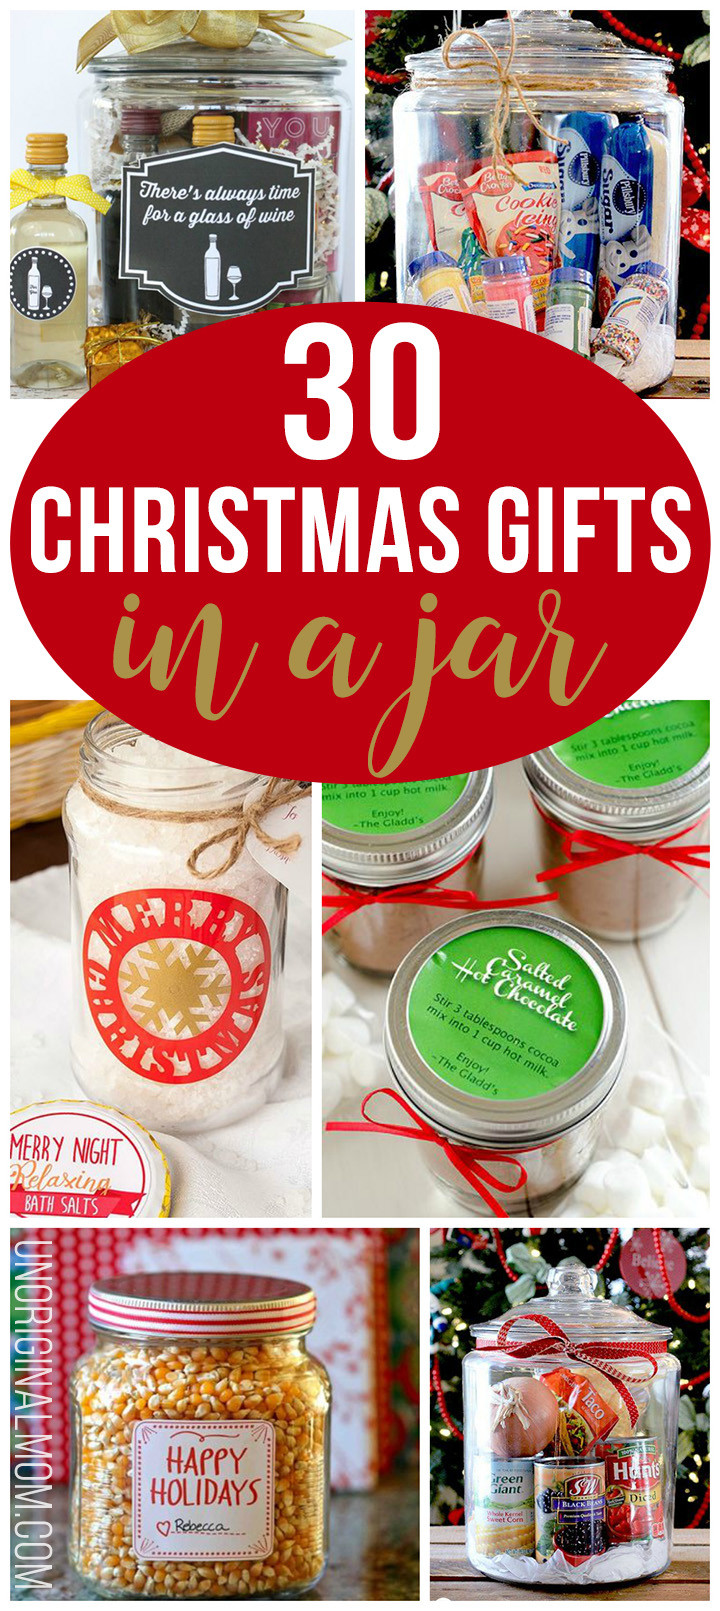 Christmas Gift Ideas On Pinterest
 30 Christmas Gifts in a Jar unOriginal Mom